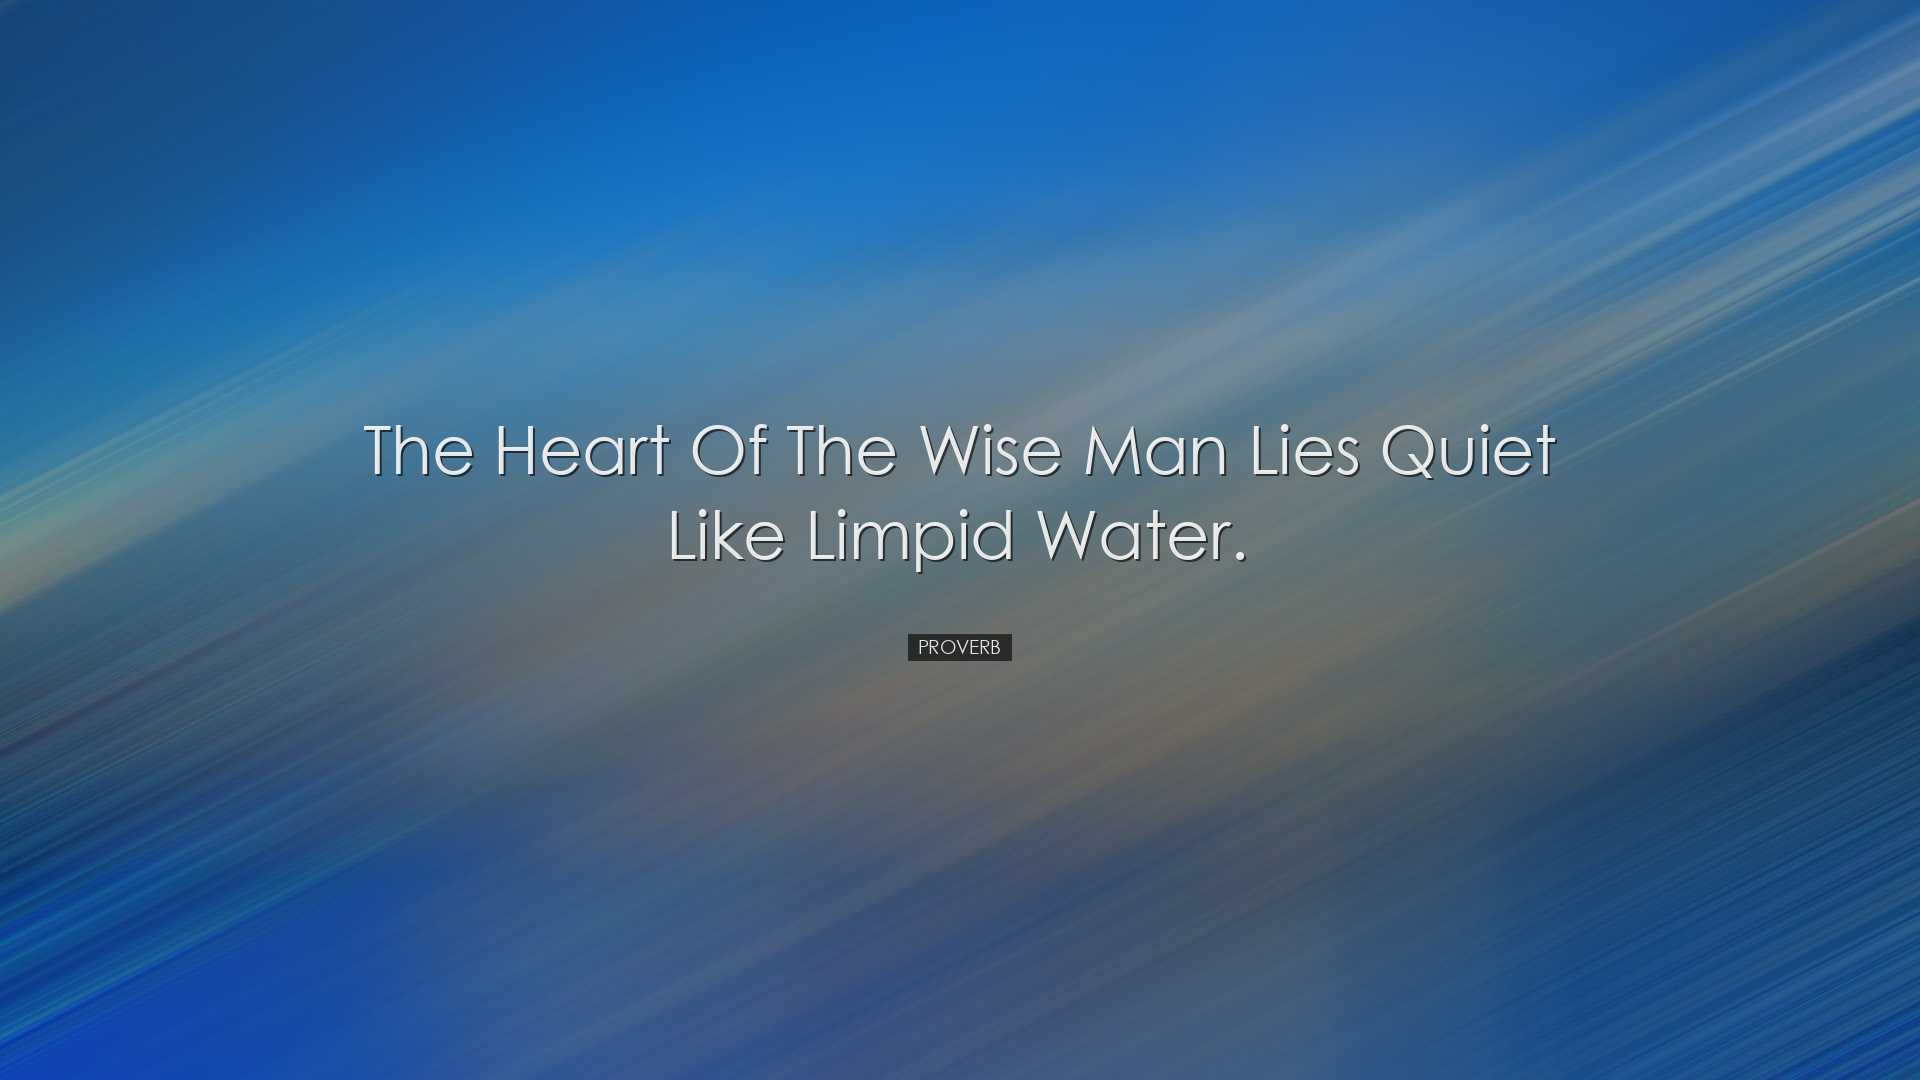 The heart of the wise man lies quiet like limpid water. - Proverb